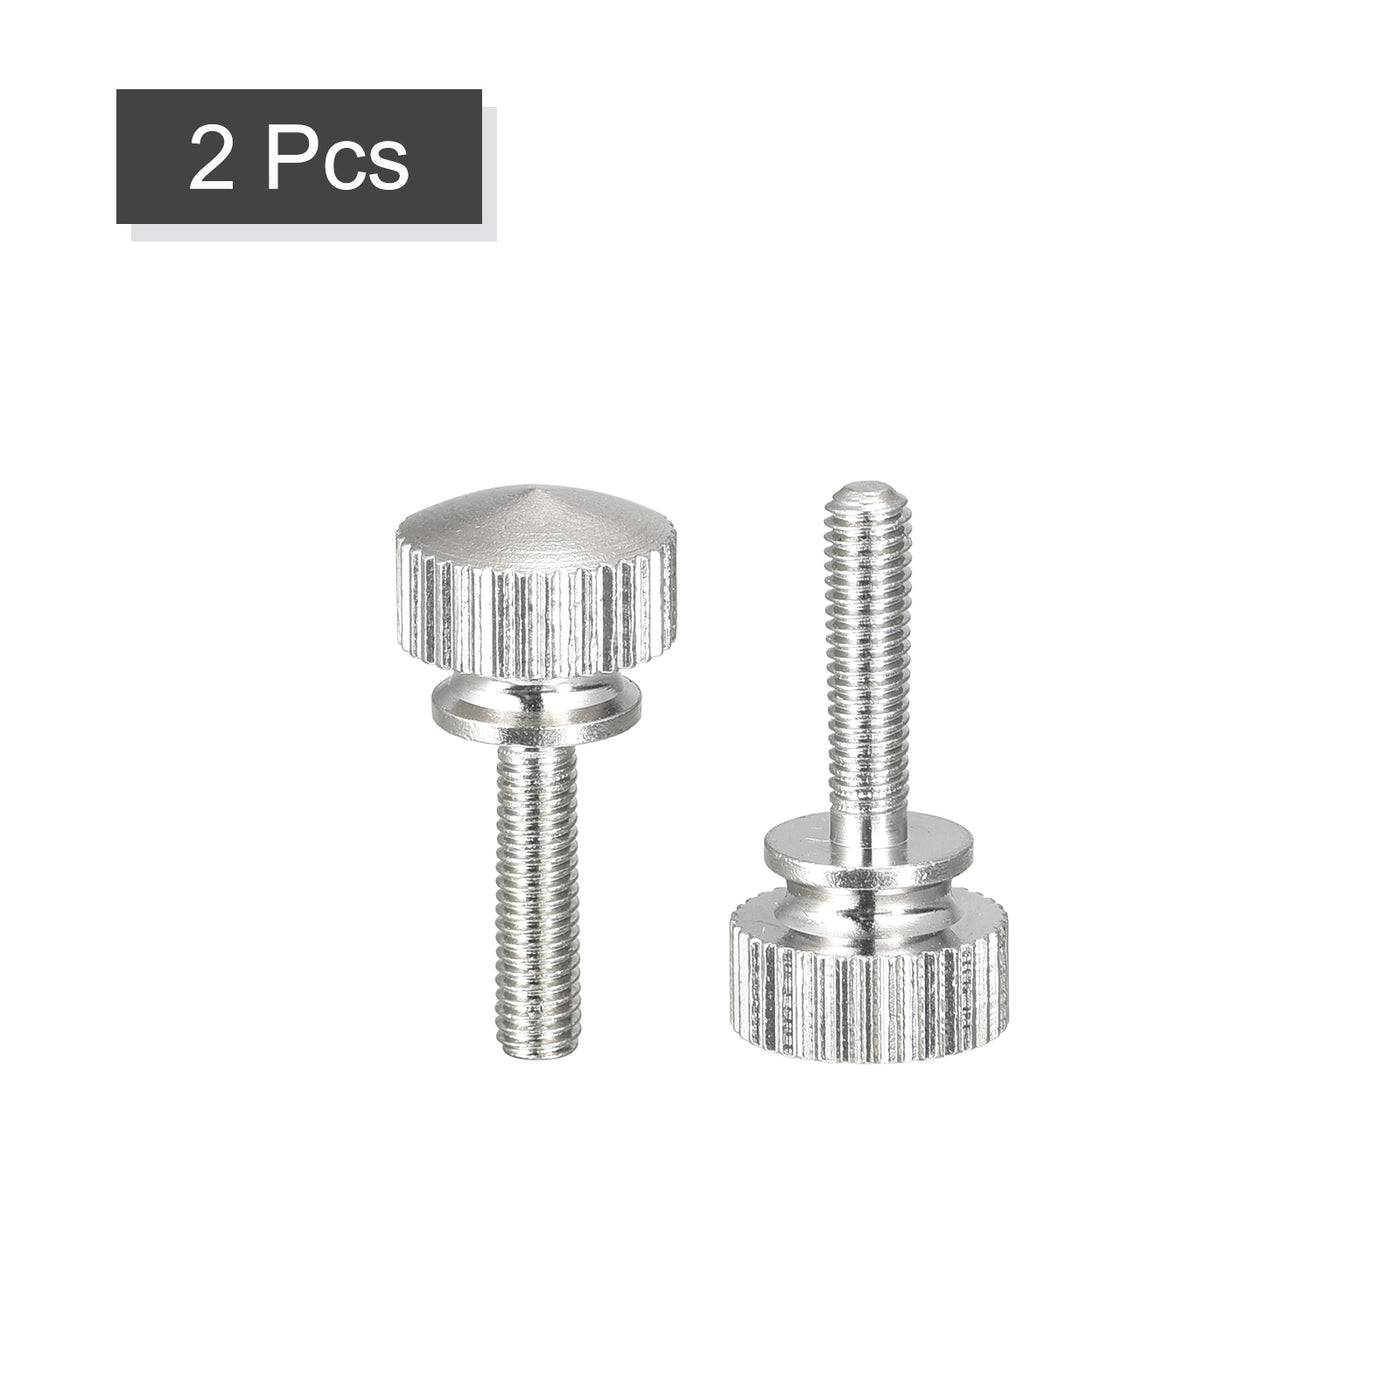 uxcell Uxcell Knurled Thumb Screws, M3x12mm Brass Shoulder Bolts Grip Knobs Fasteners, Nickel Plated 2Pcs